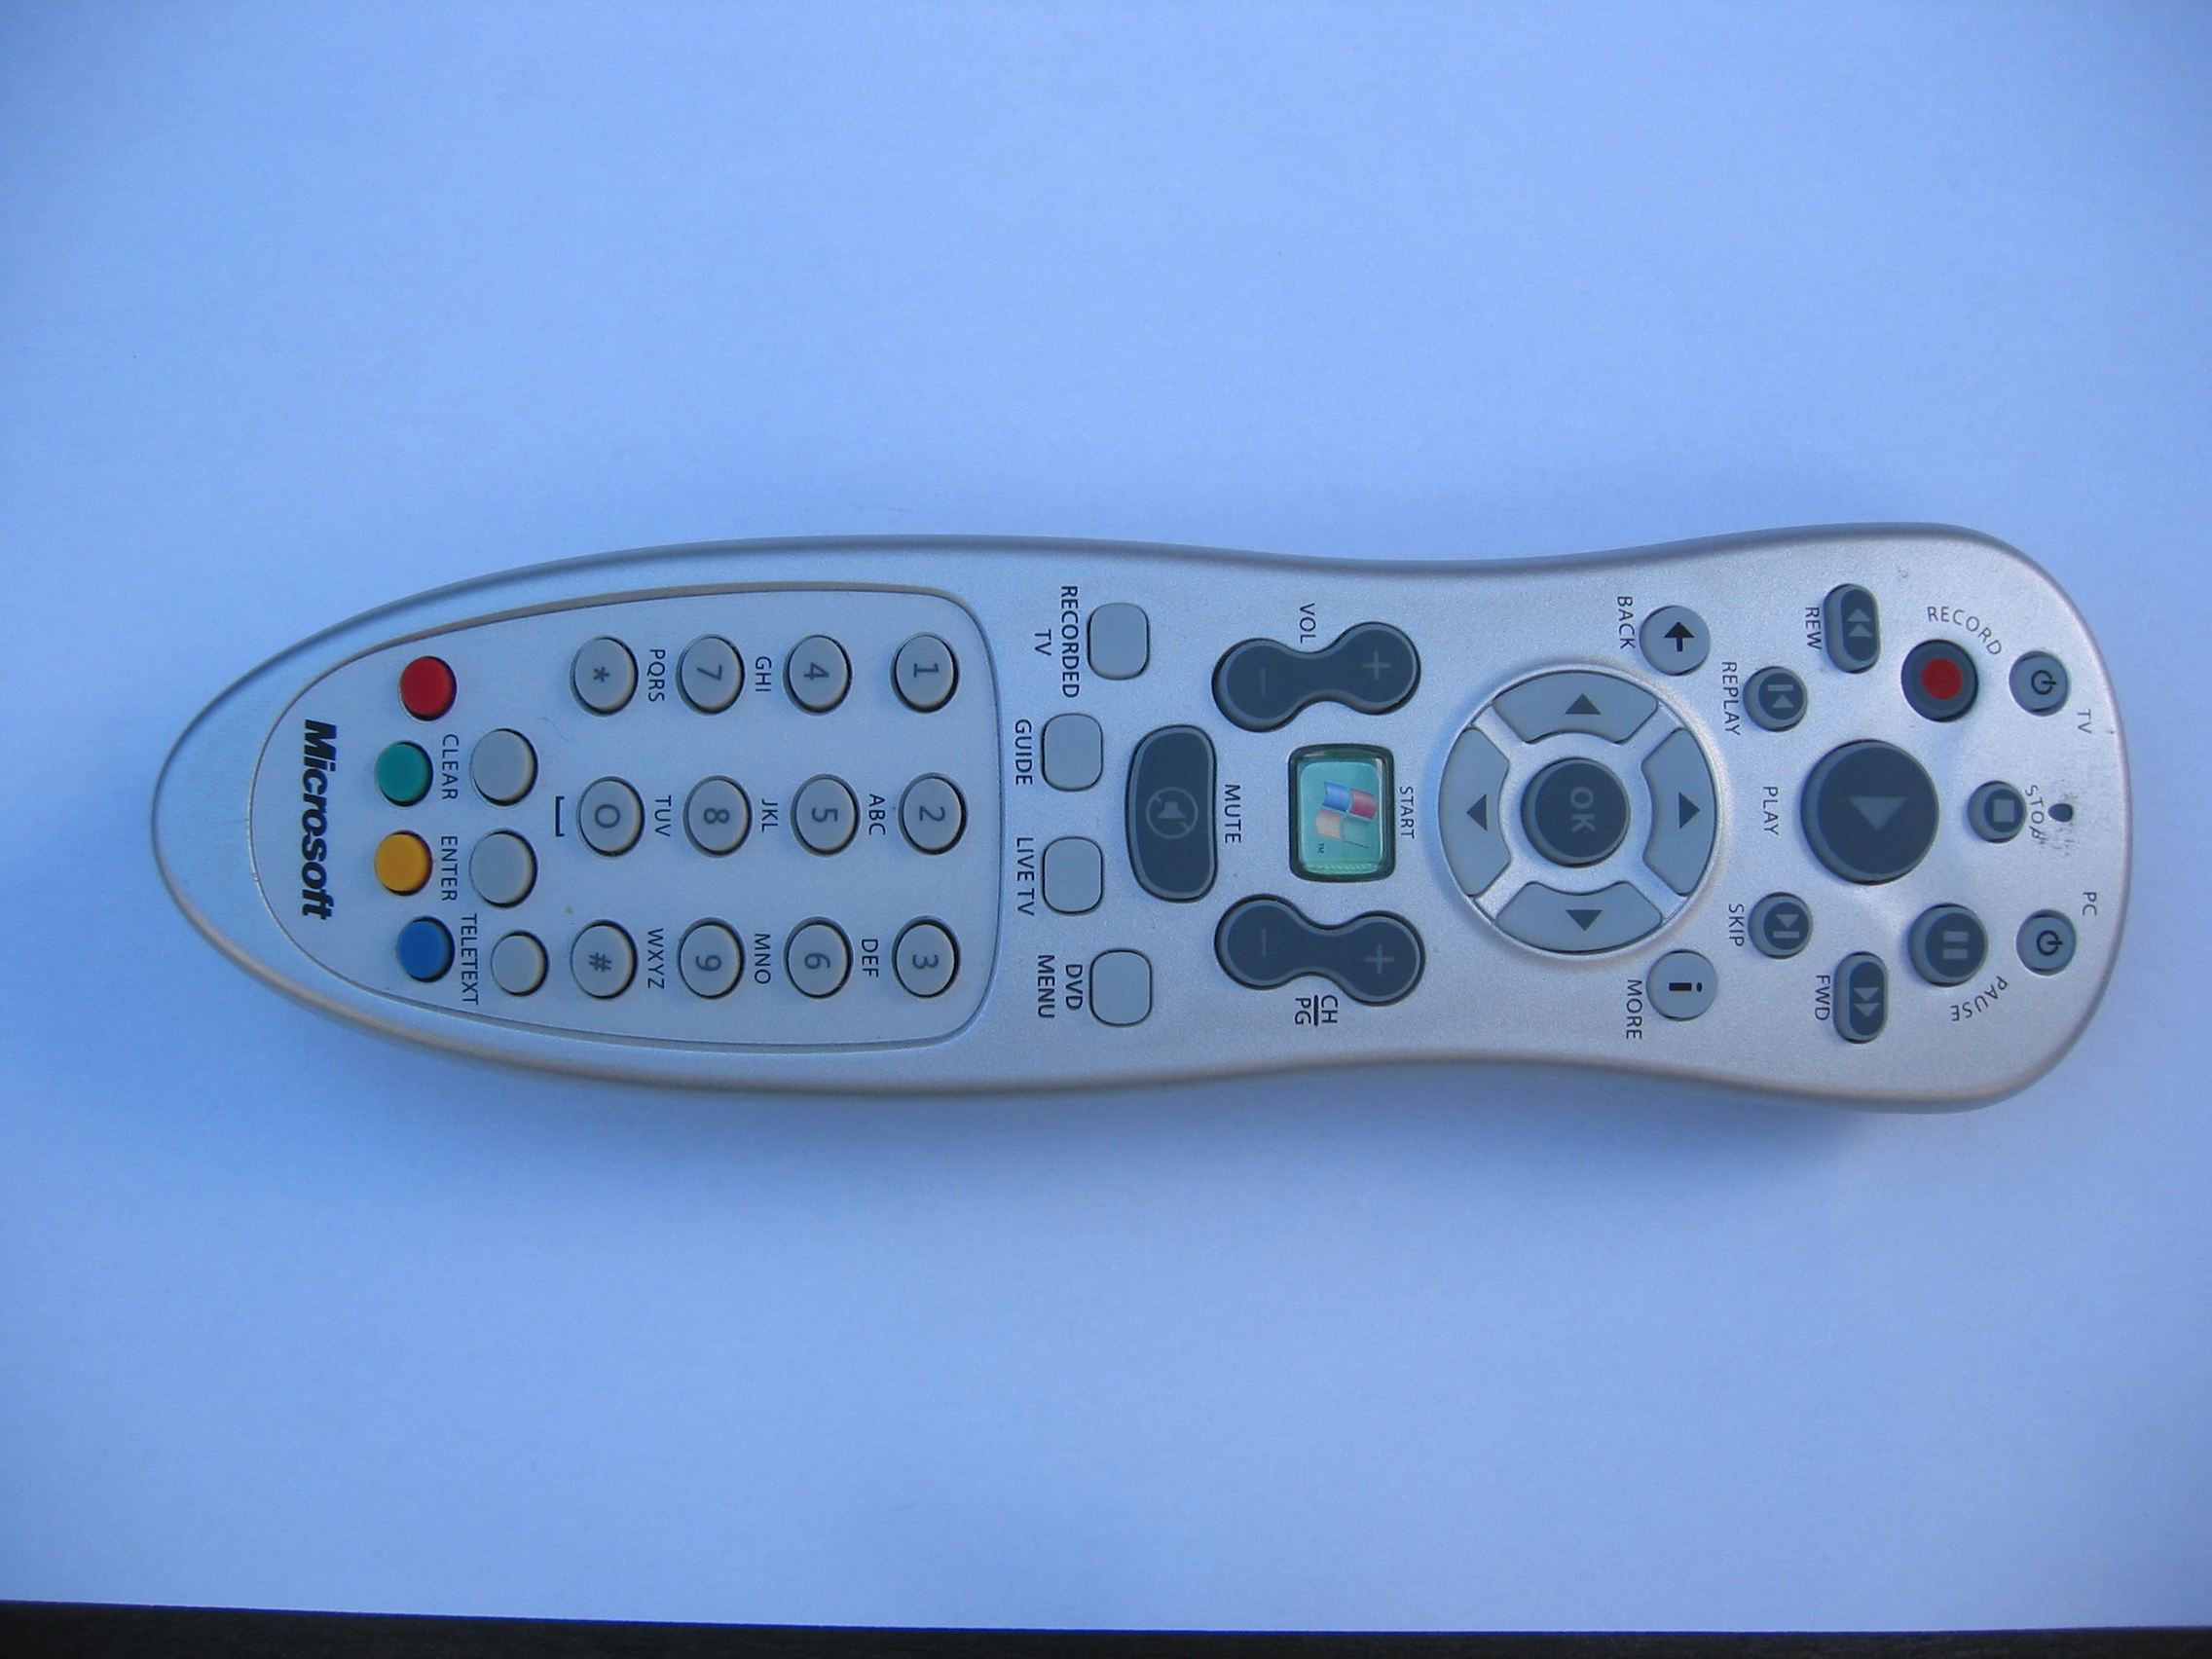 Microsoft Remote Control and Receiver 1.0A for media Center PC with Windows (model 1040) - remote